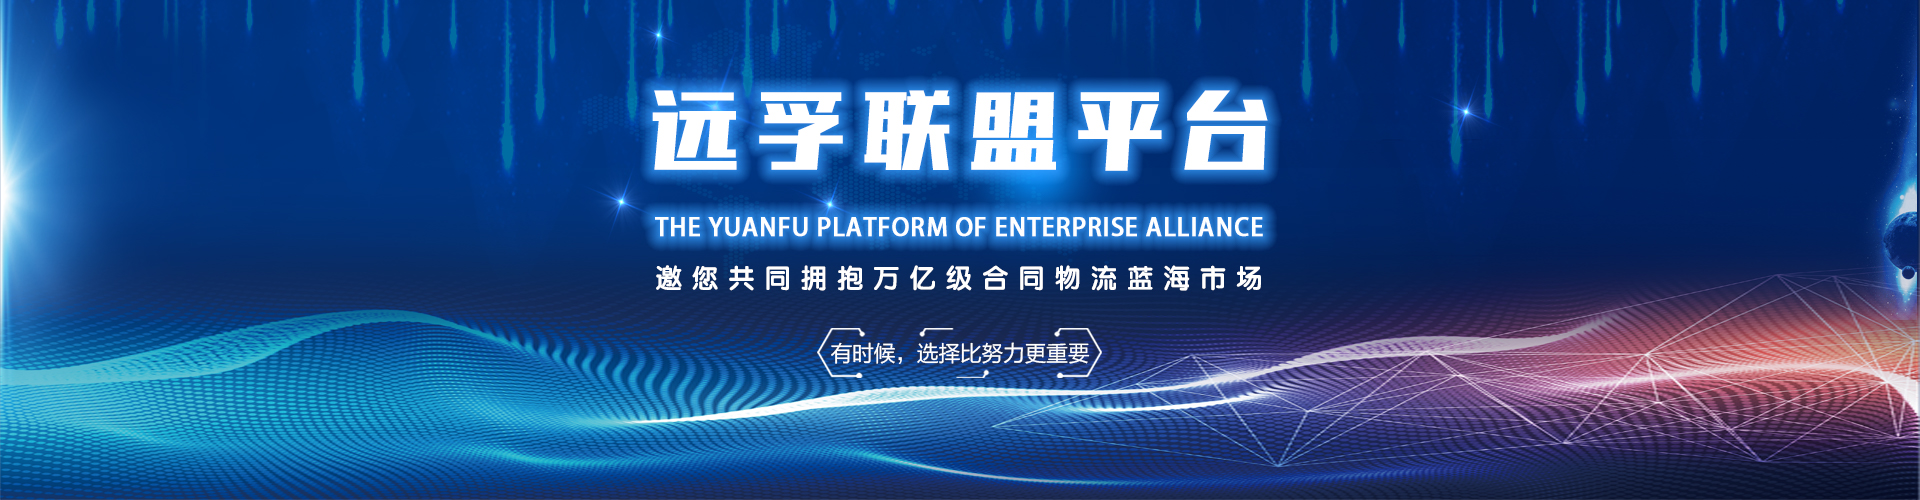 Machinery Industry_Yuanfu Logistics Group Co.,Ltd.—Serving our customer to focus on core business,win-win on the supply chain【official website】